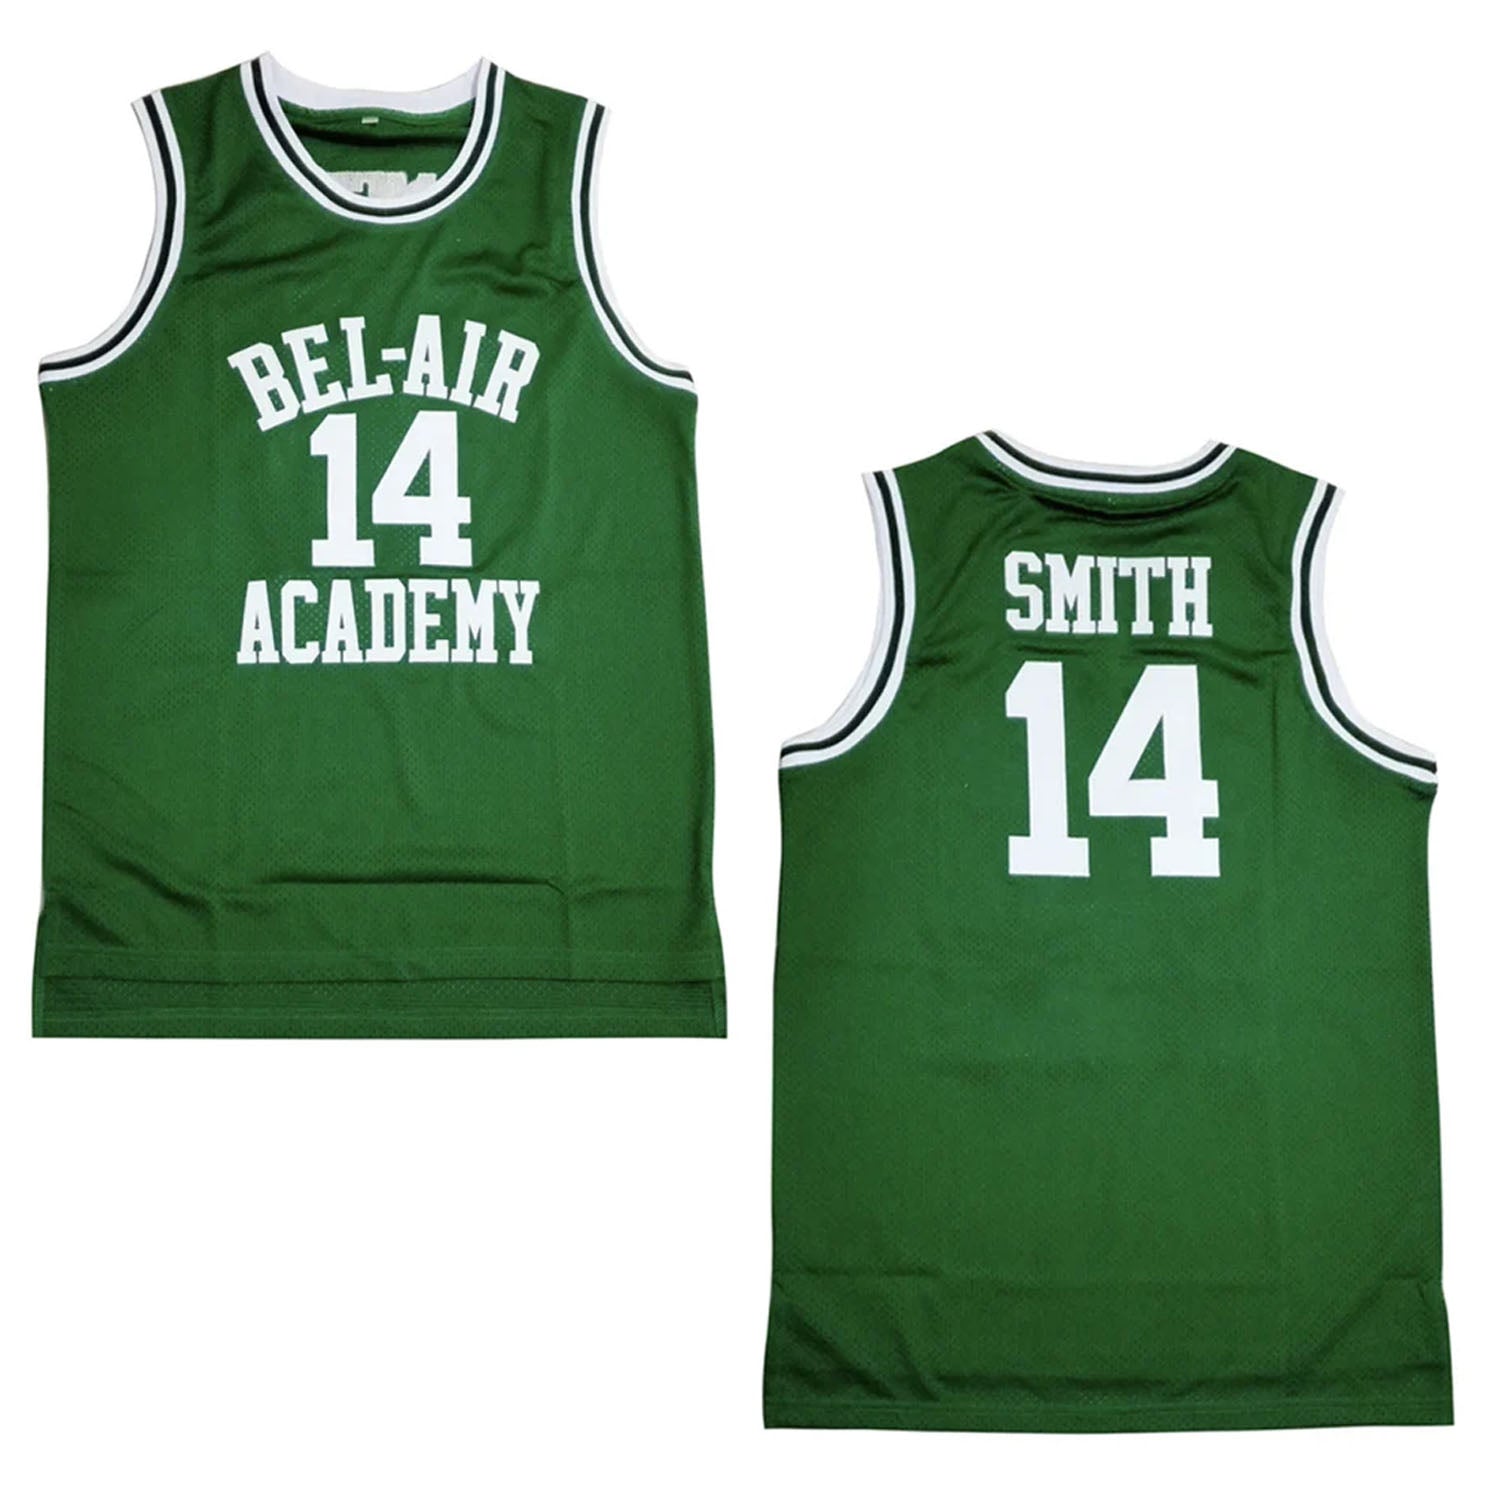 You Can Finally Cop The Official Will Smith-Approved Bel-Air Academy Jersey